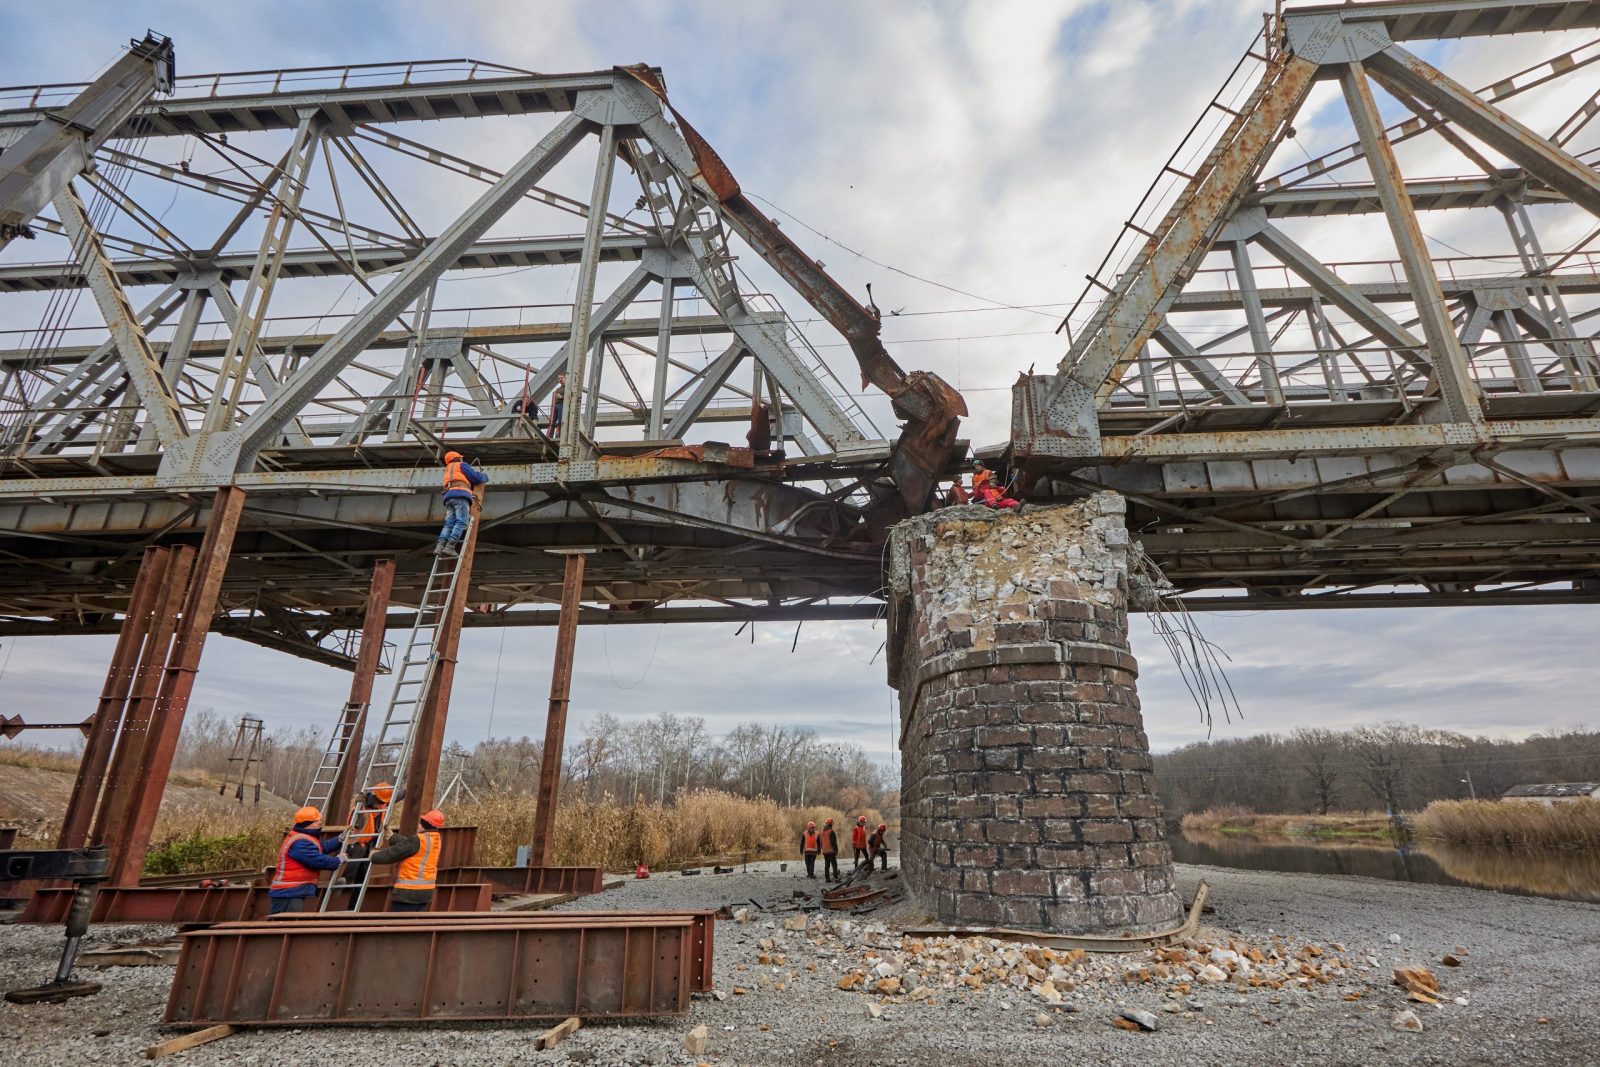 epa10282254 Workers repair a railway bridge after it was damaged in fighting between the Ukrainian and Russian armies in the town of Kupiansk, in Kharkiv region, Ukraine, 02 November 2022. The railway normally connects Kupiansk with Kharkiv which was retaken by the Ukrainian forces in September. Russian troops on 24 February entered Ukrainian territory, starting a conflict that has provoked destruction and a humanitarian crisis.  EPA/SERGIY KOZLOV